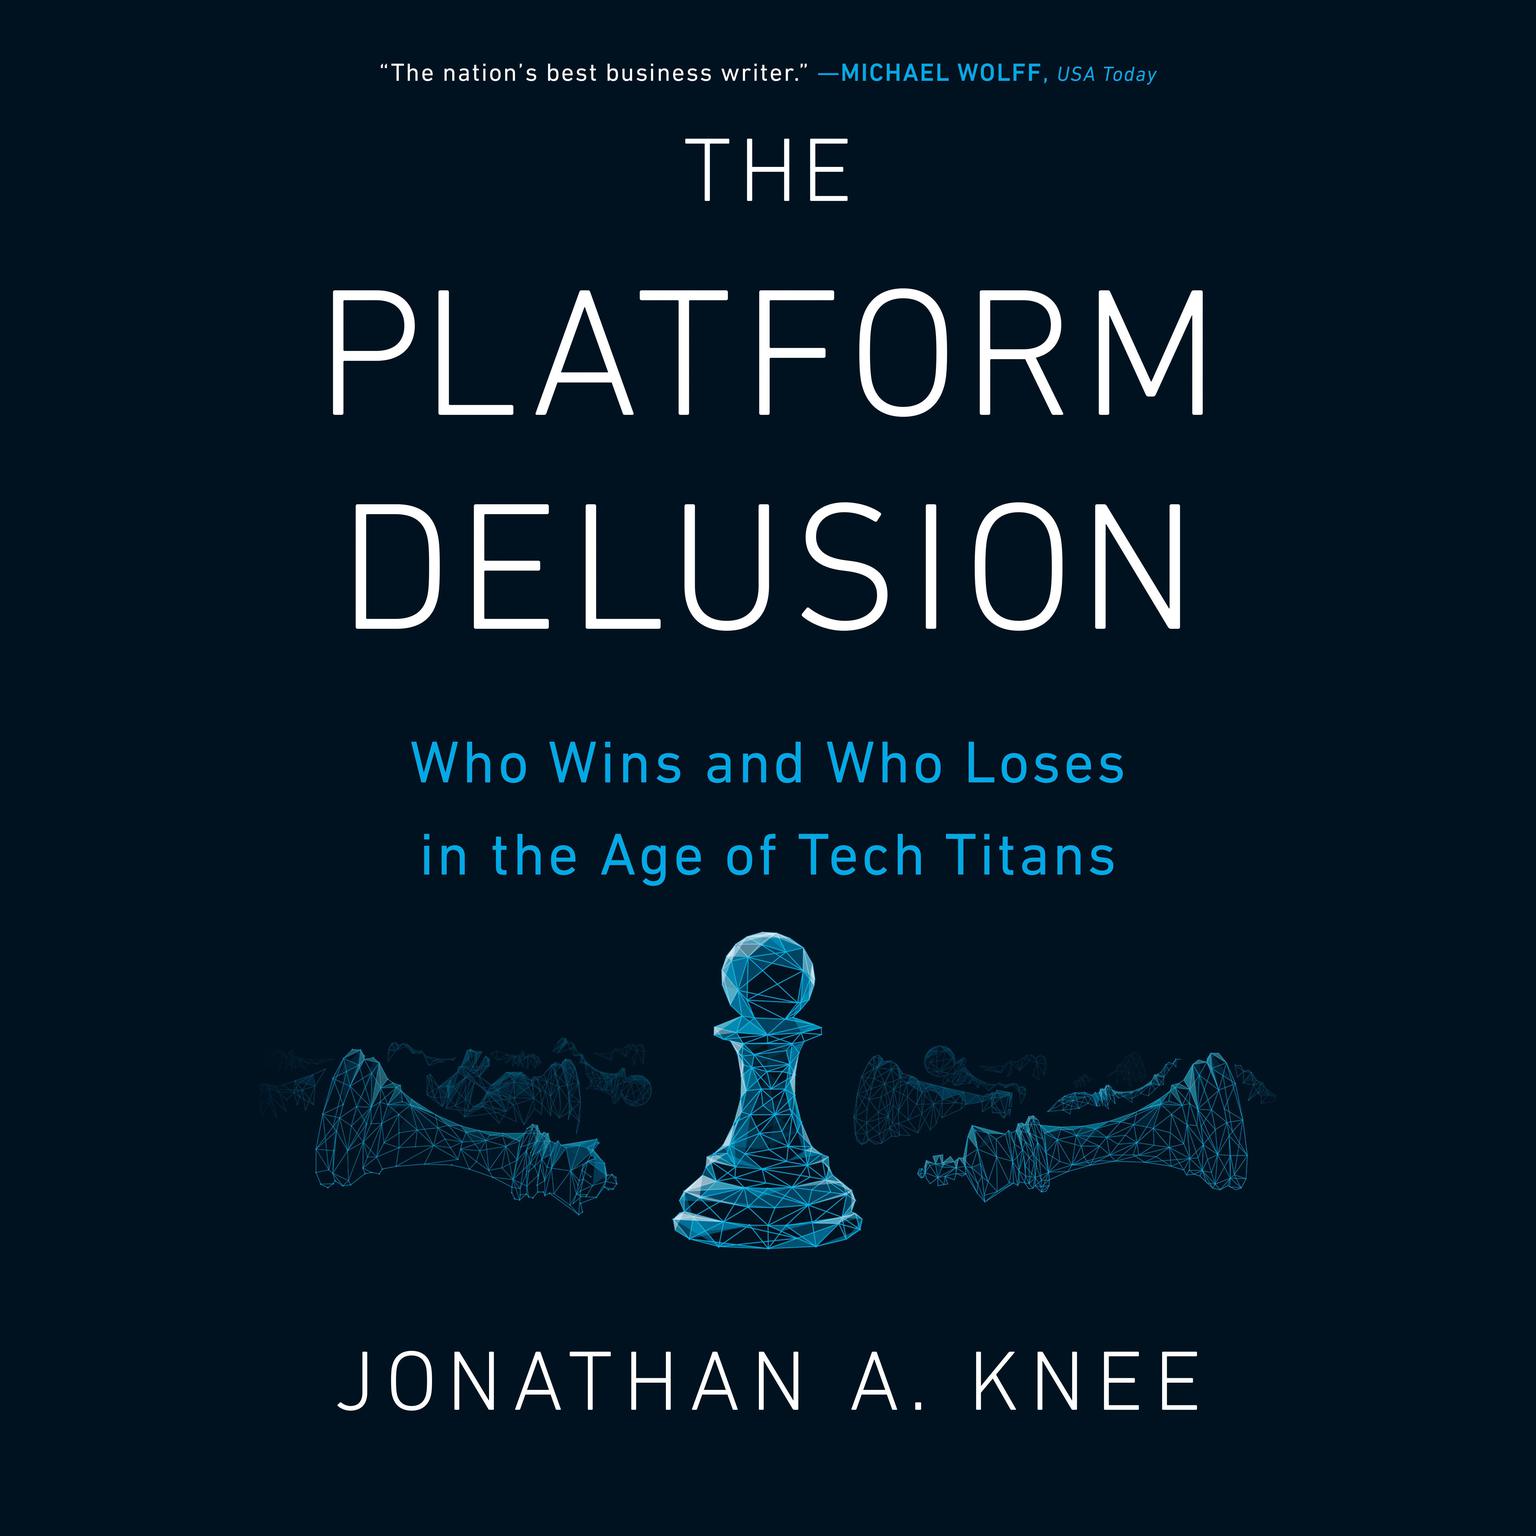 The Platform Delusion: Who Wins and Who Loses in the Age of Tech Titans Audiobook, by Jonathan A. Knee